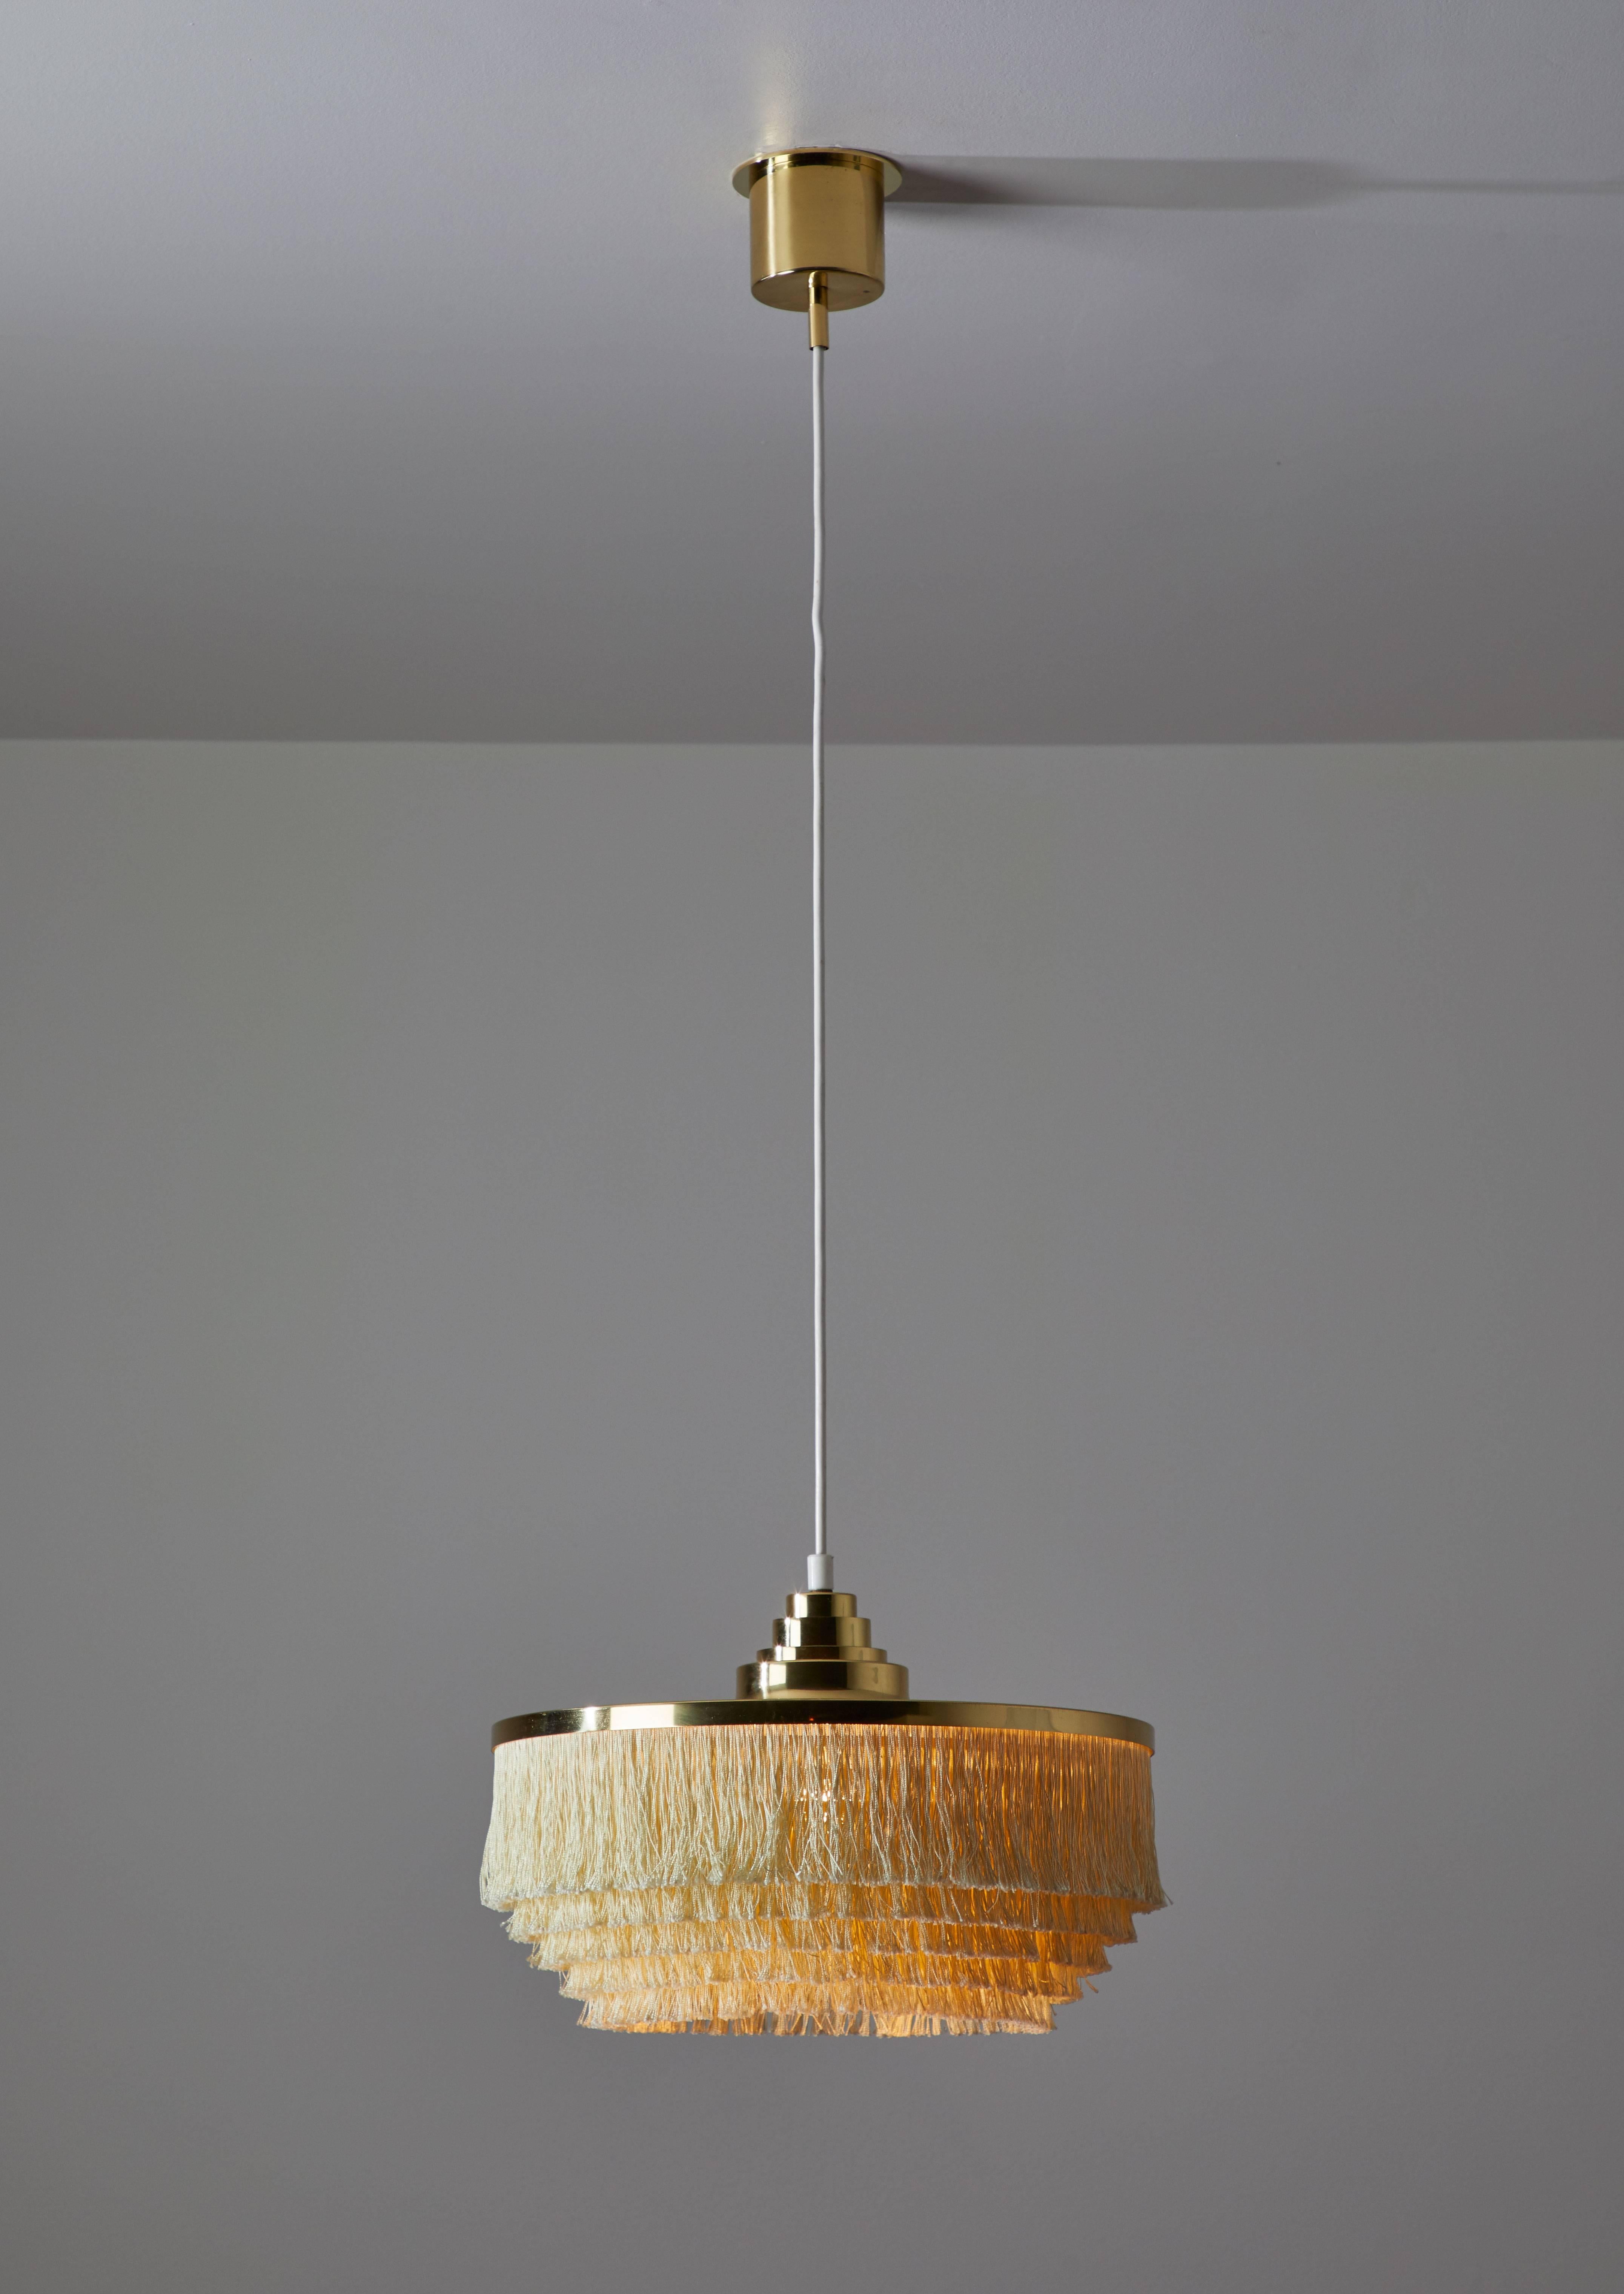 One fringe silk cord pendant by Hans Agne Jakobsson, Markaryd. Five tiers of cream colored fringe silk cord with brass hardware frame and canopy. E27 75W maximum bulb. Overall drop can be customized. 